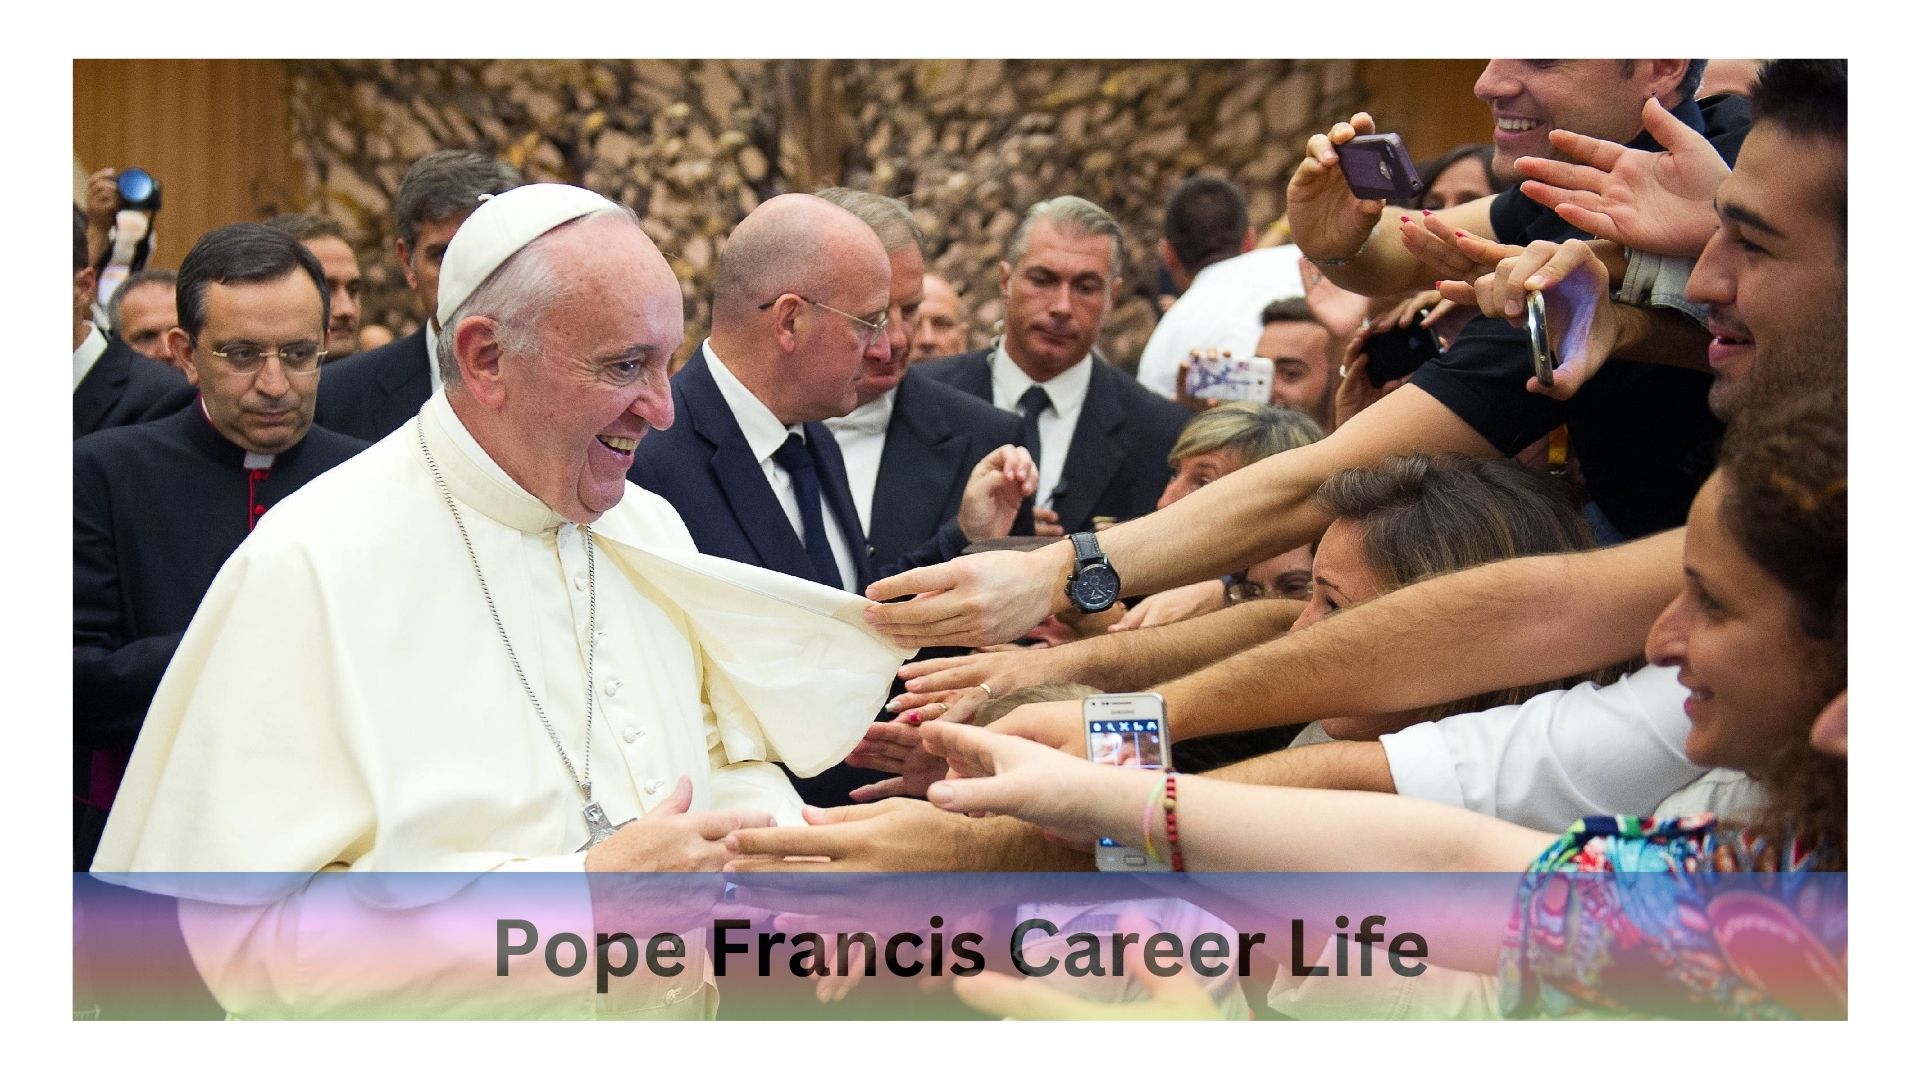 Pope Francis Career Life